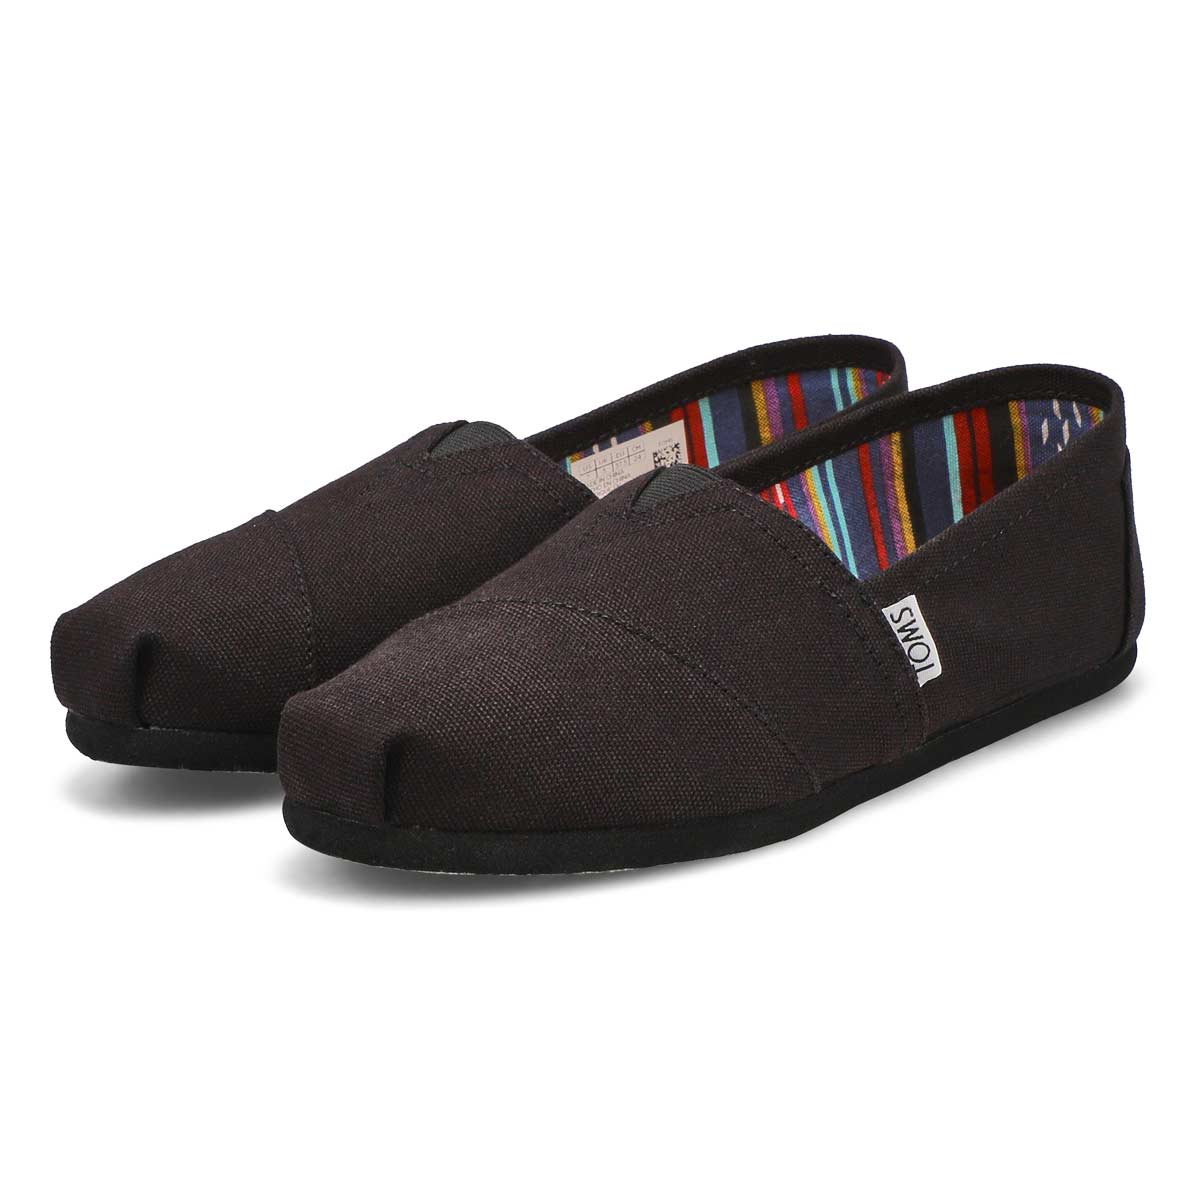 TOMS Women's Classic Canvas Loafer - Black | SoftMoc.com